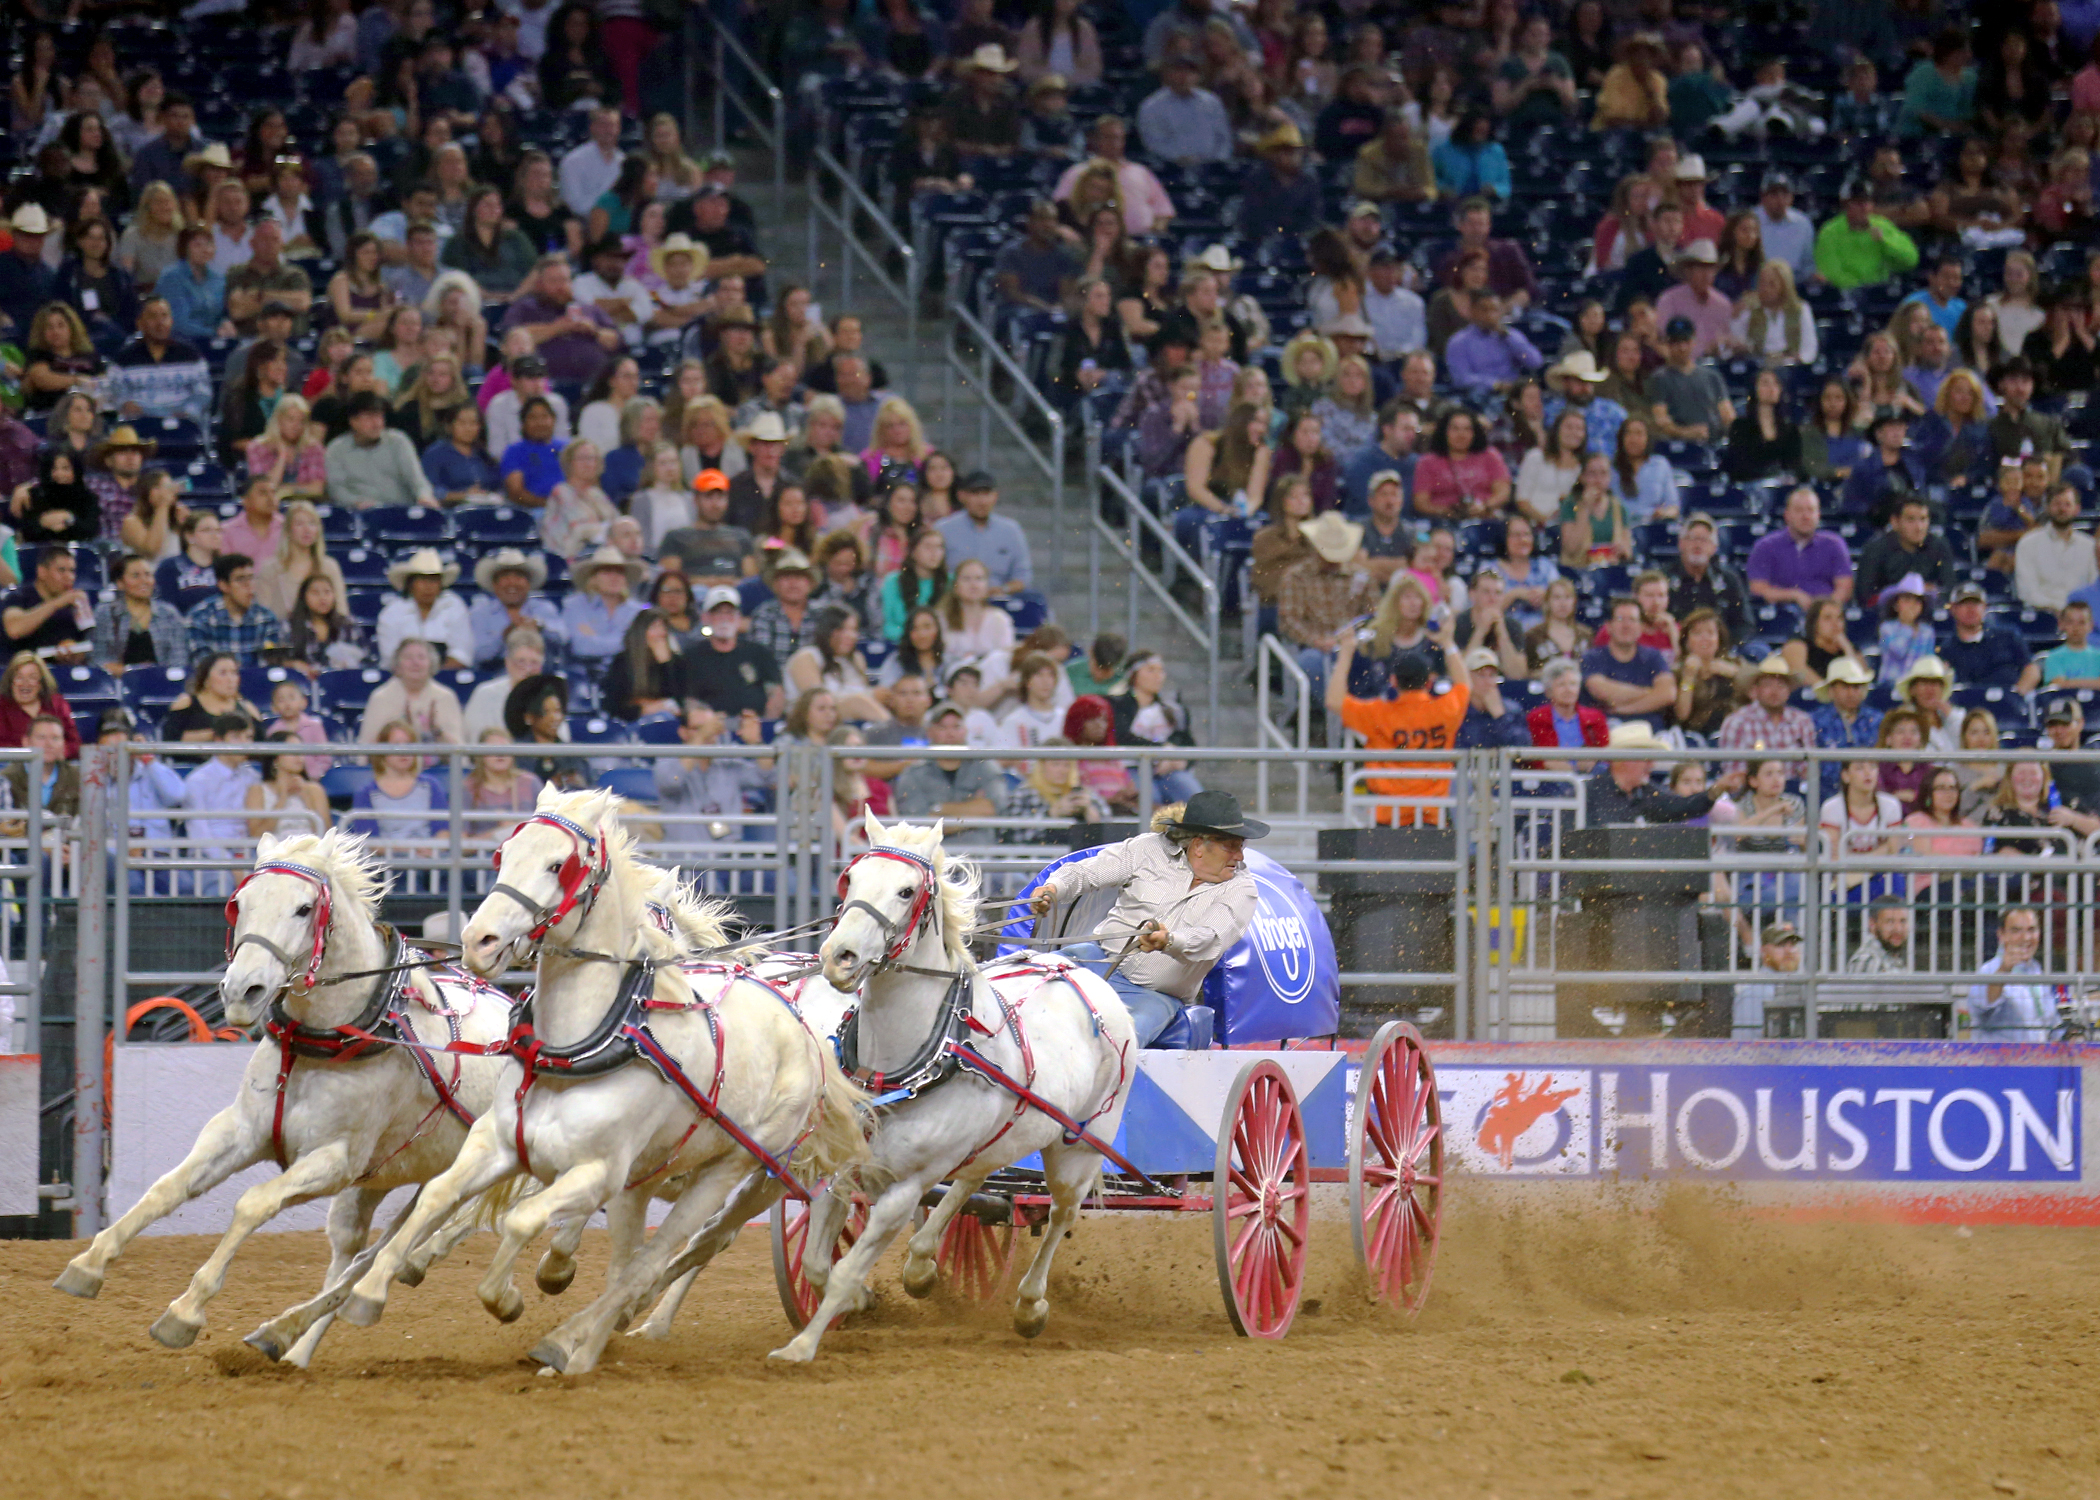 » The Economic Impact of Houston Livestock Show and Rodeo™ An Estimate